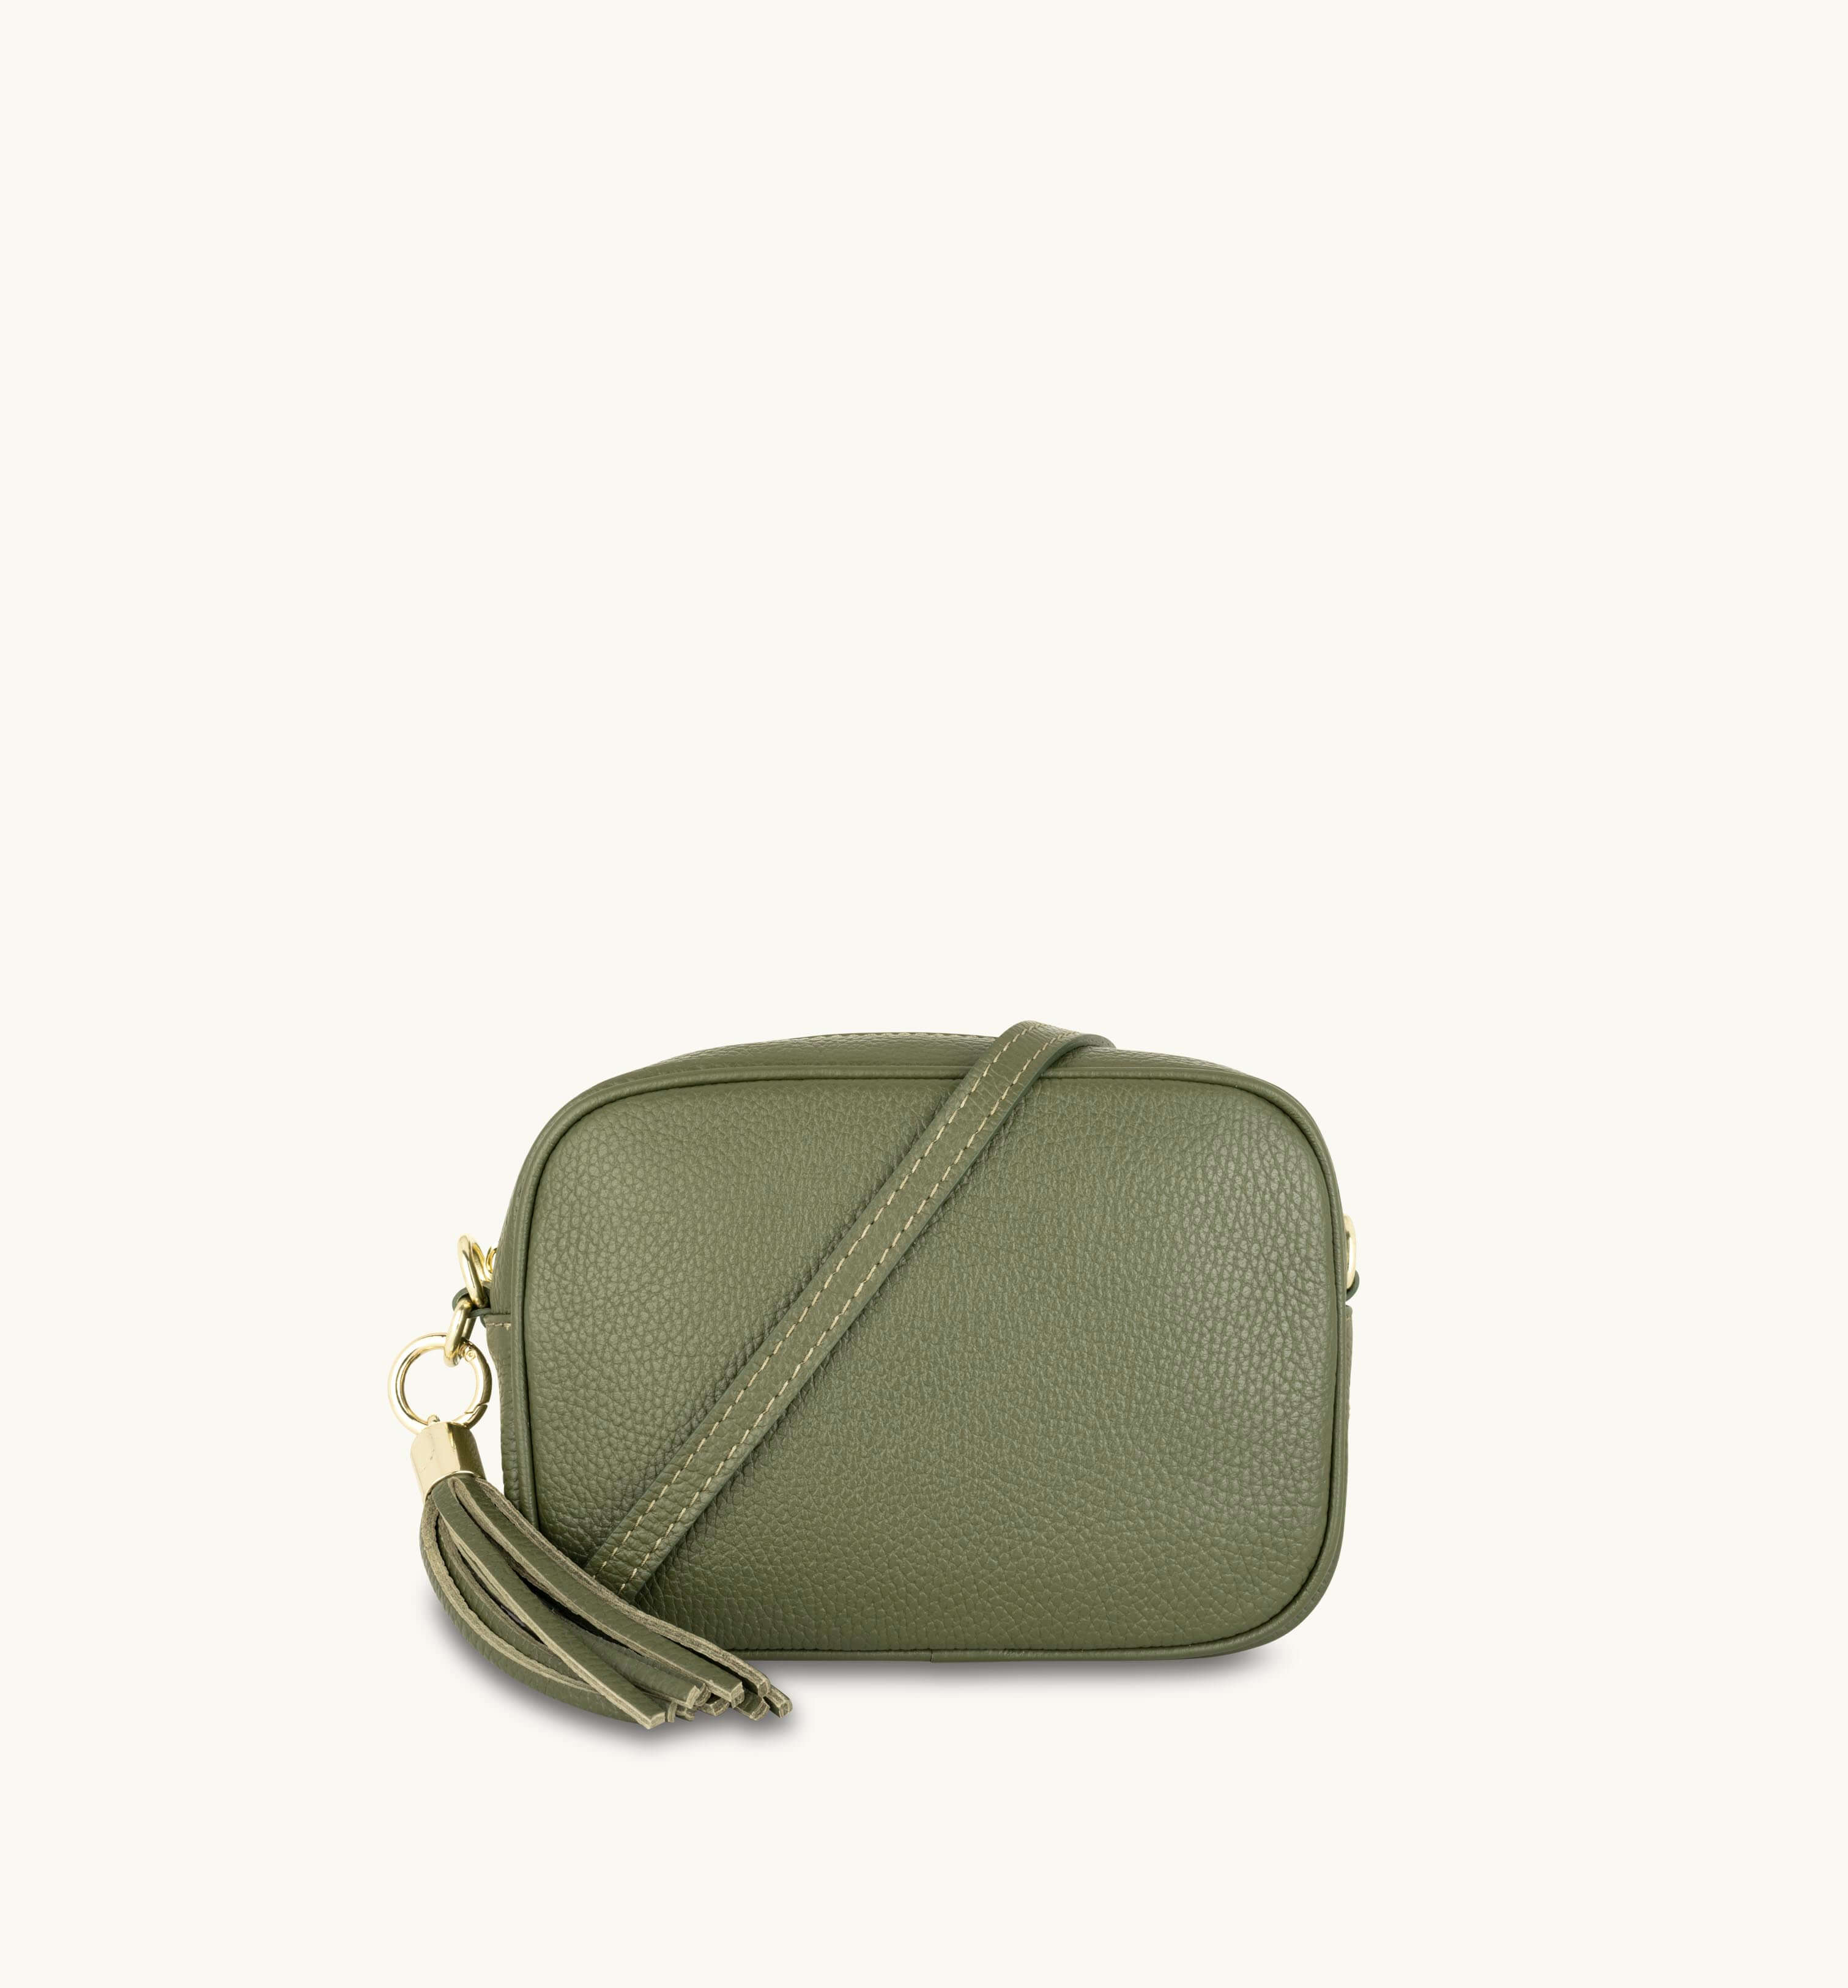 Apatchy London Olive Green Leather Crossbody Bag